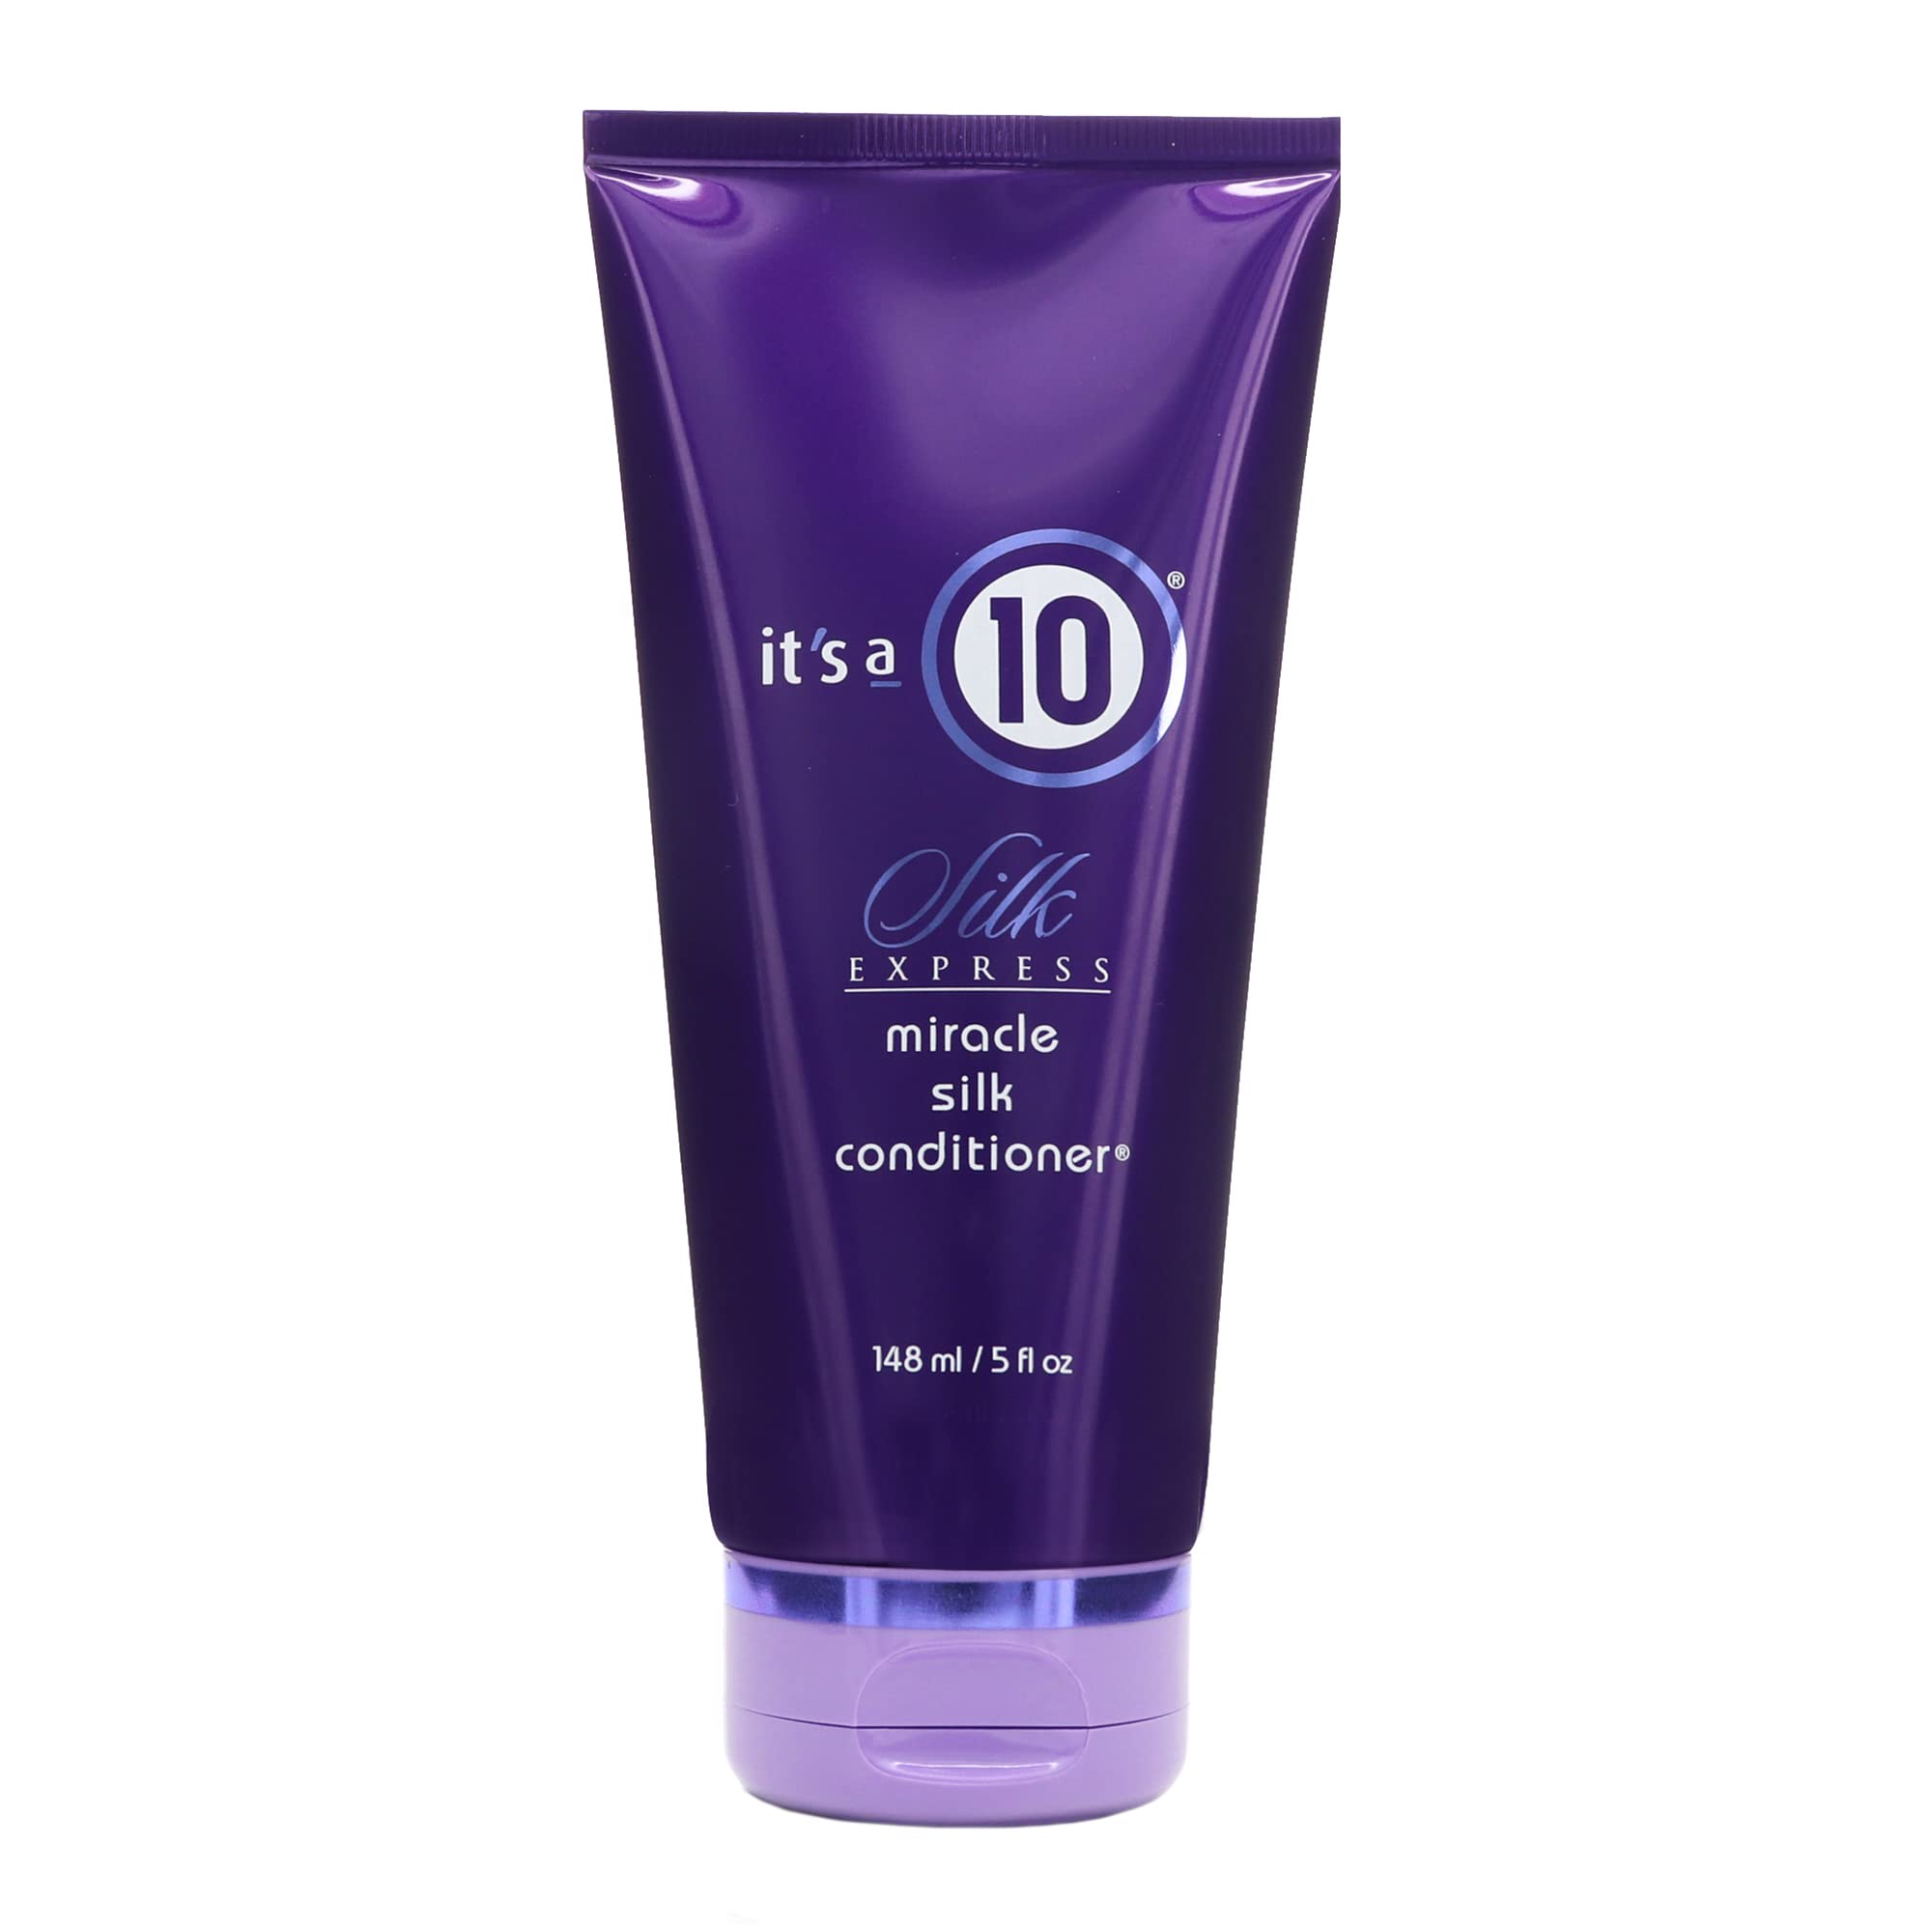 It's A 10 Silk Express Miracle Silk Conditioner for Unisex, 5 Ounce